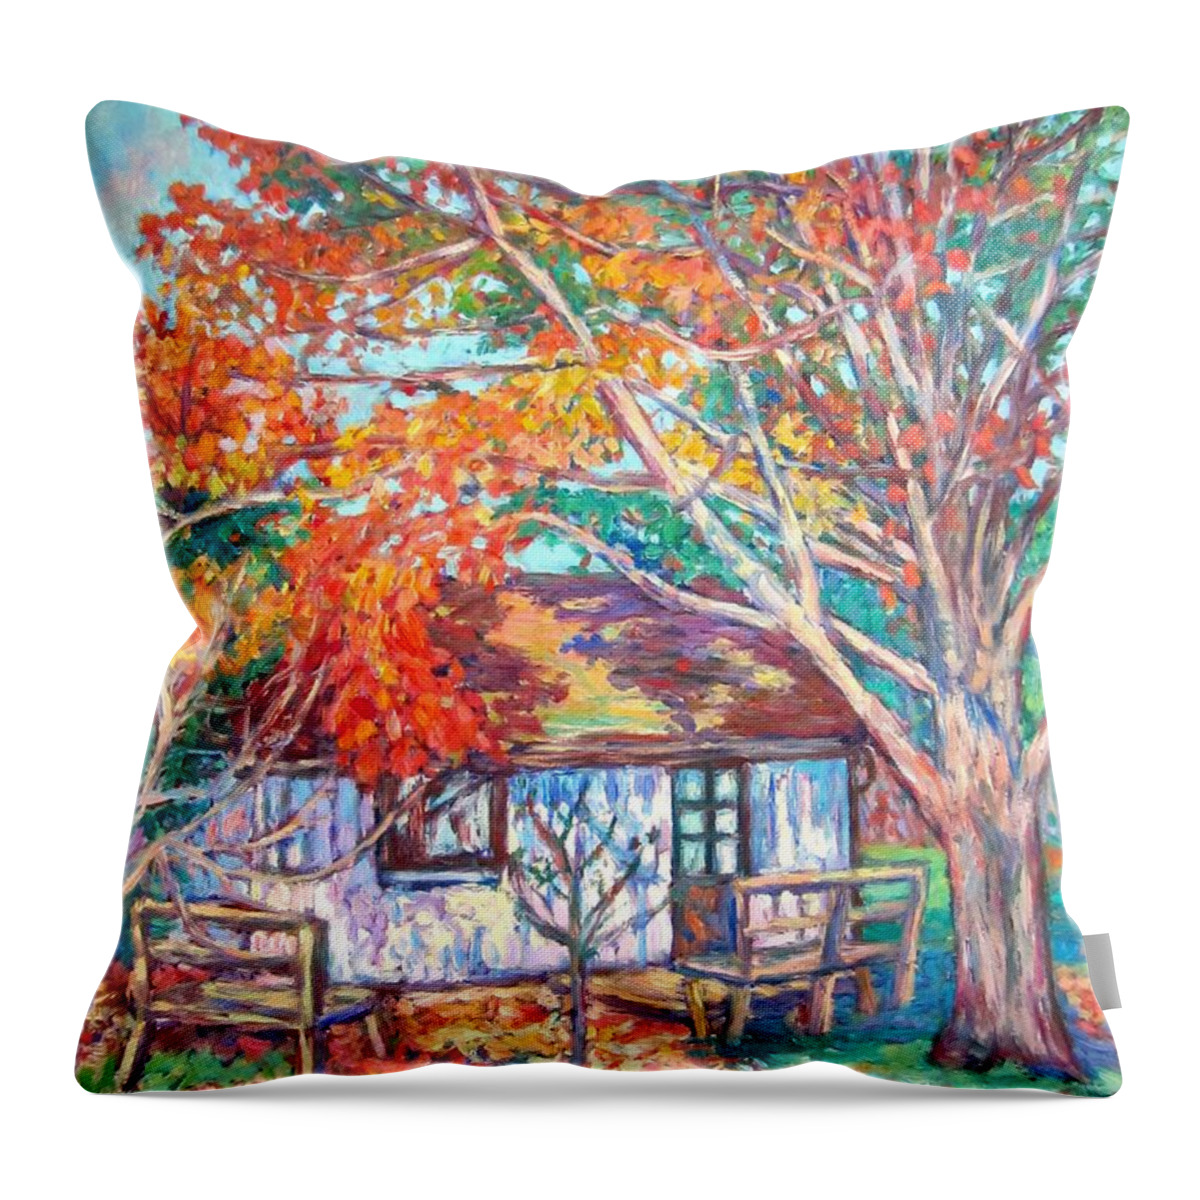 Claytor Lake Throw Pillow featuring the painting Claytor Lake Cabin in Fall by Kendall Kessler